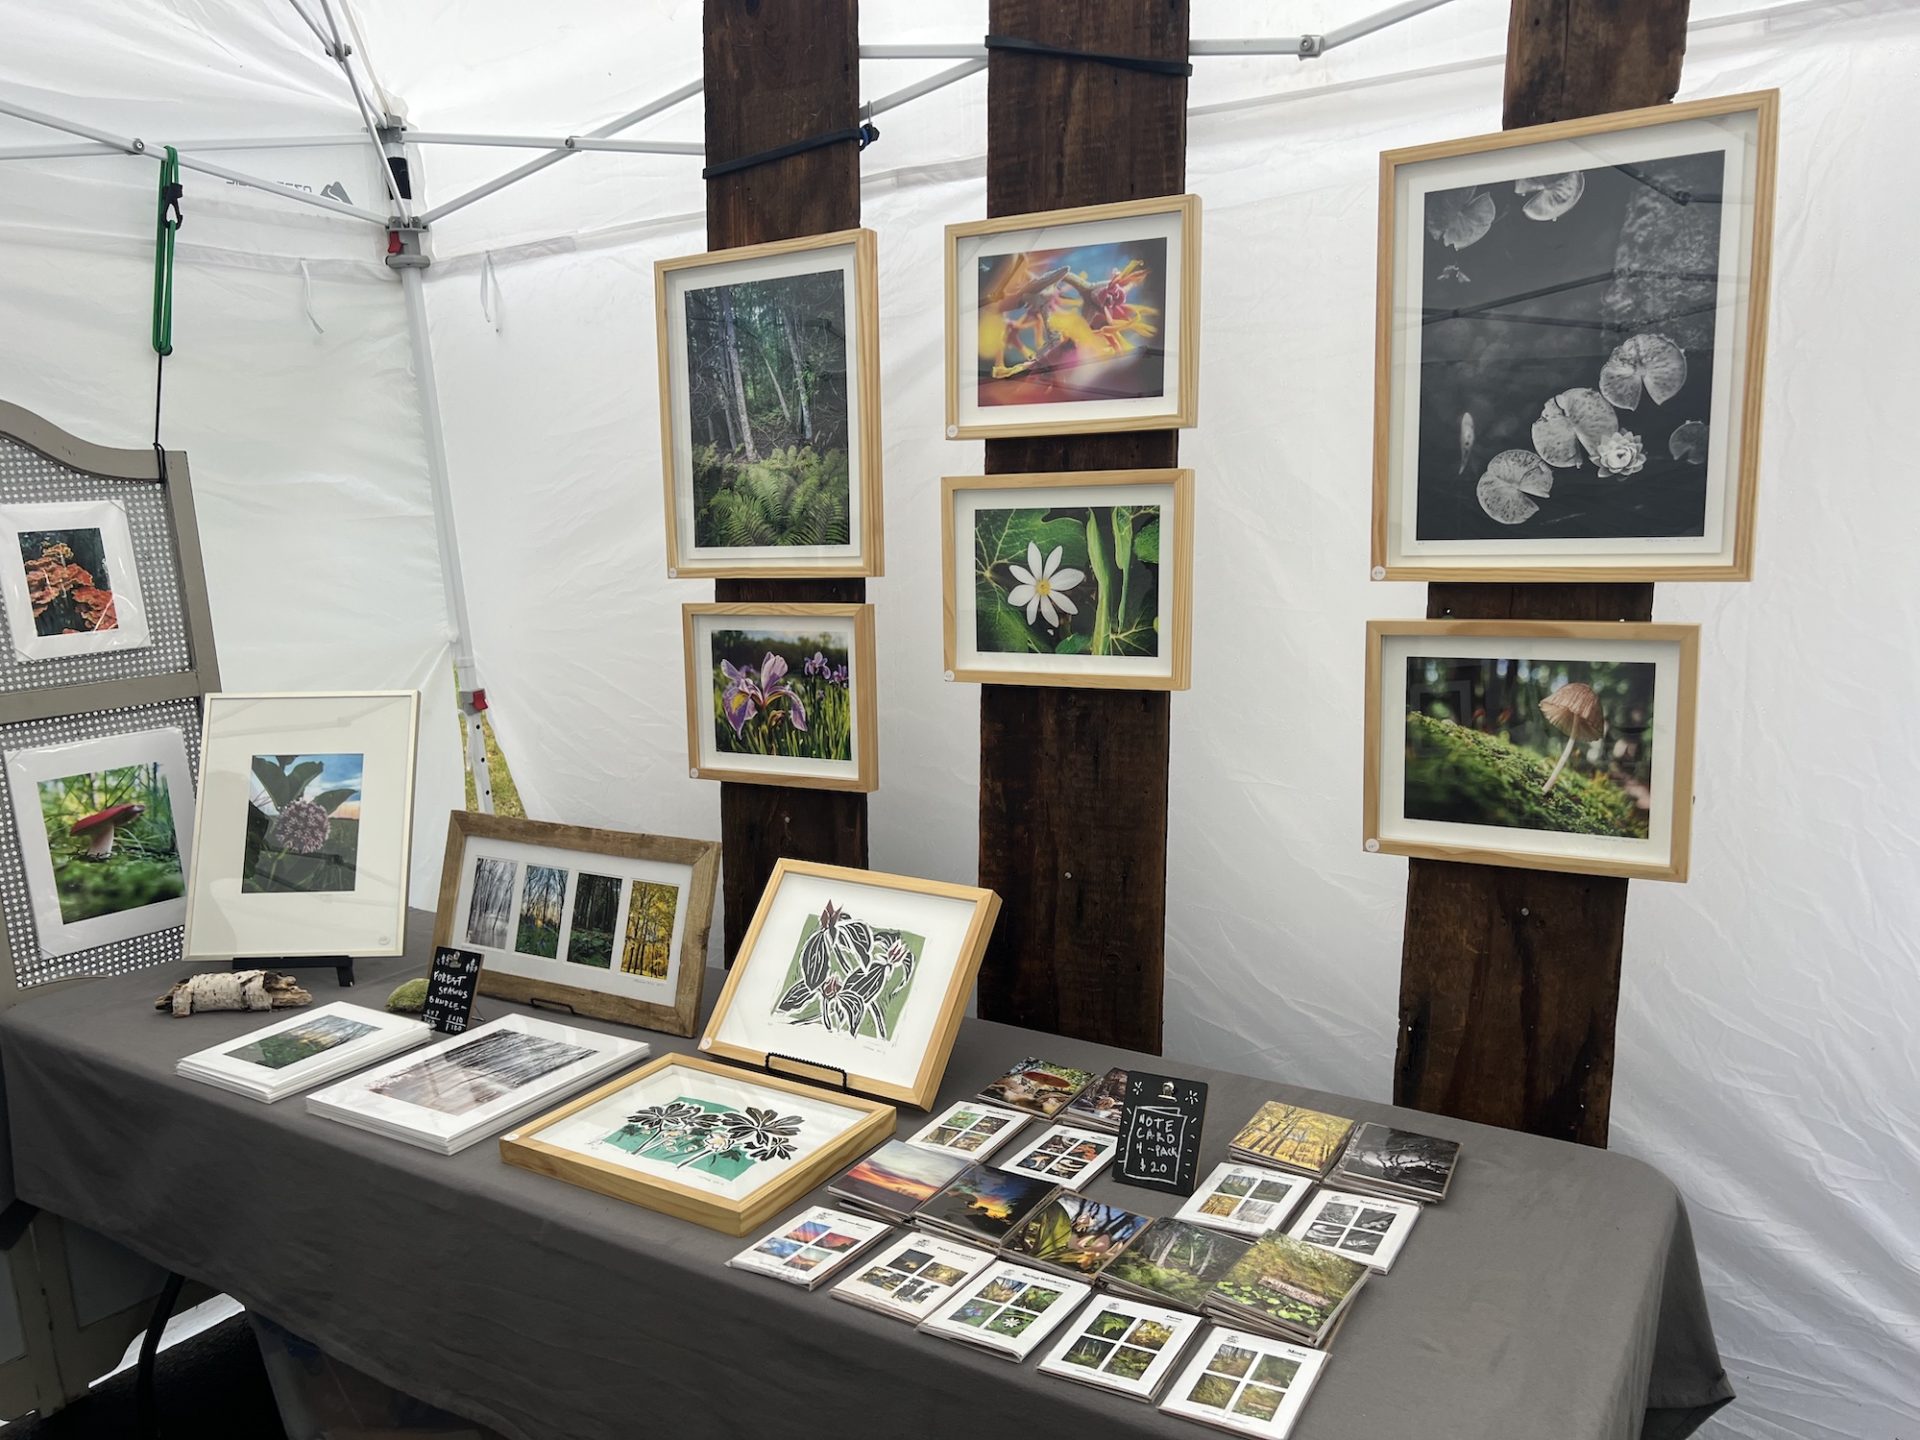 a selection of photography hangs in a tent and lays on the table. The photos are mostly close up nature shots of forests and flowers